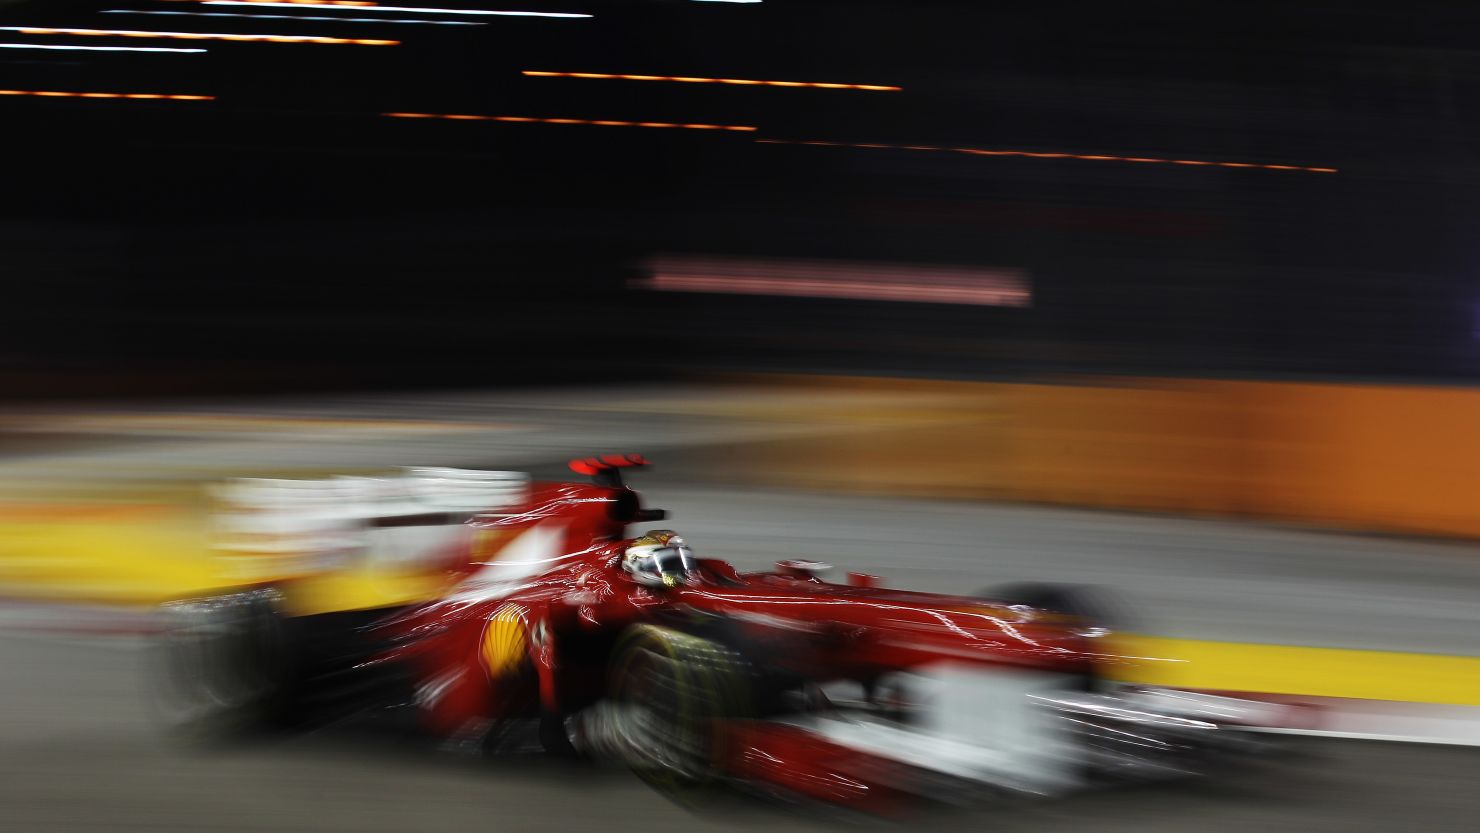 Plans for Formula One to be listed on the Singapore stock exchange appear to be on hold.